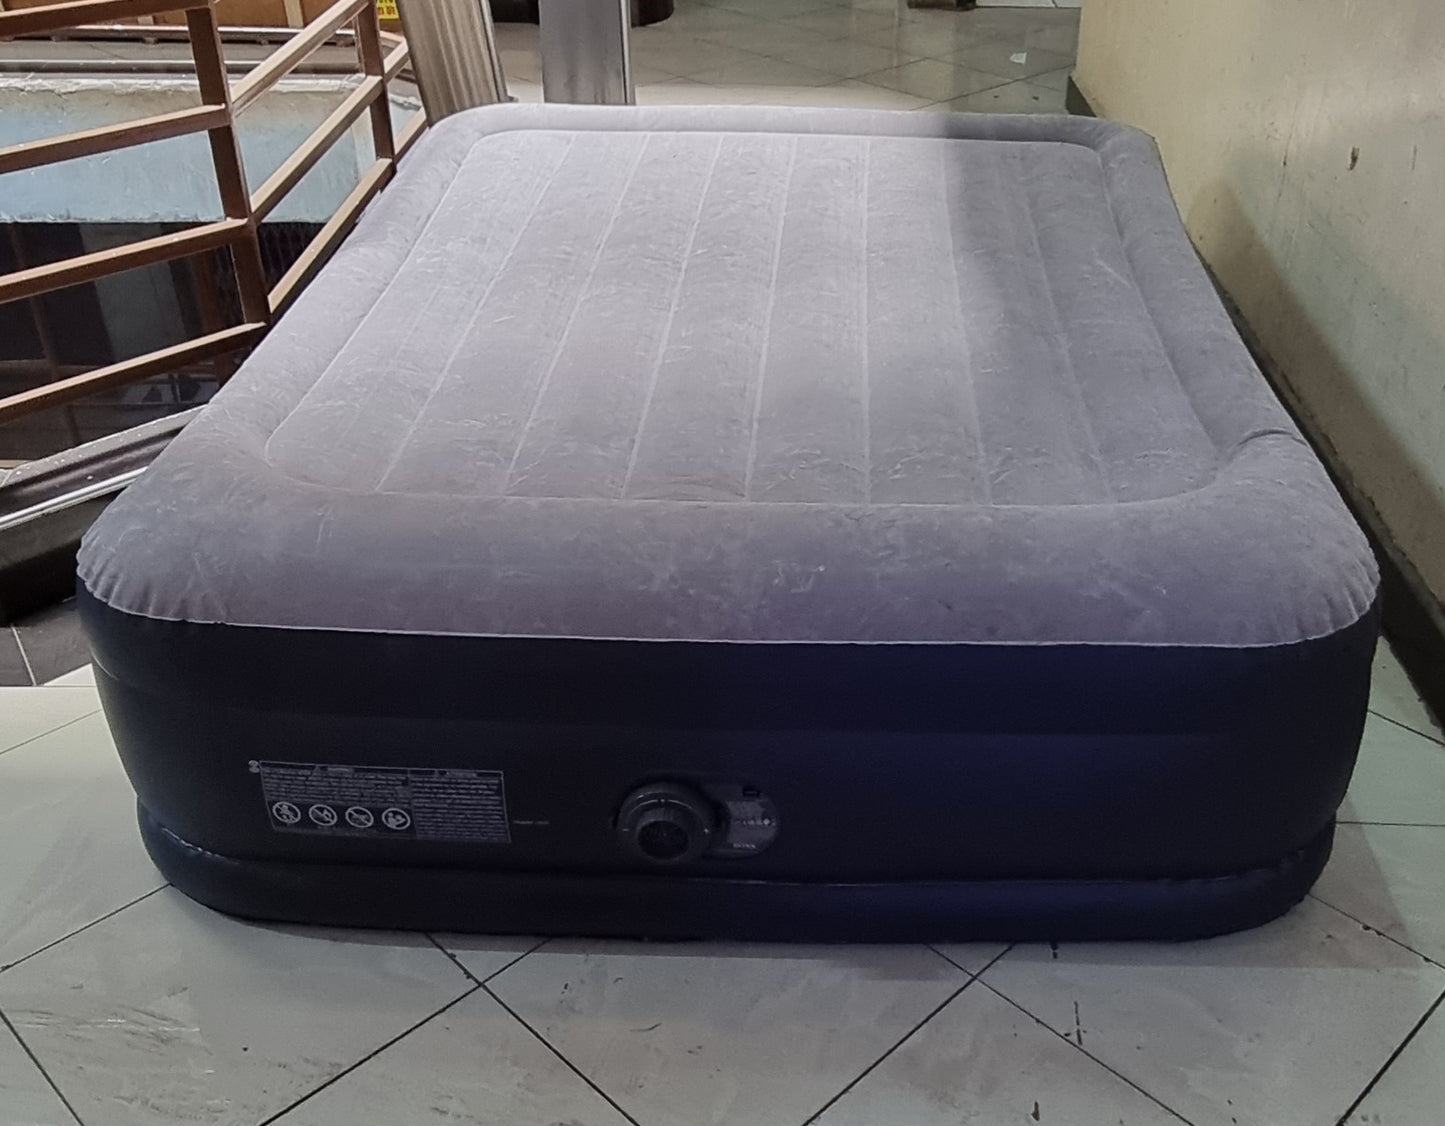 Intex Airbed 42cm with Electric pump